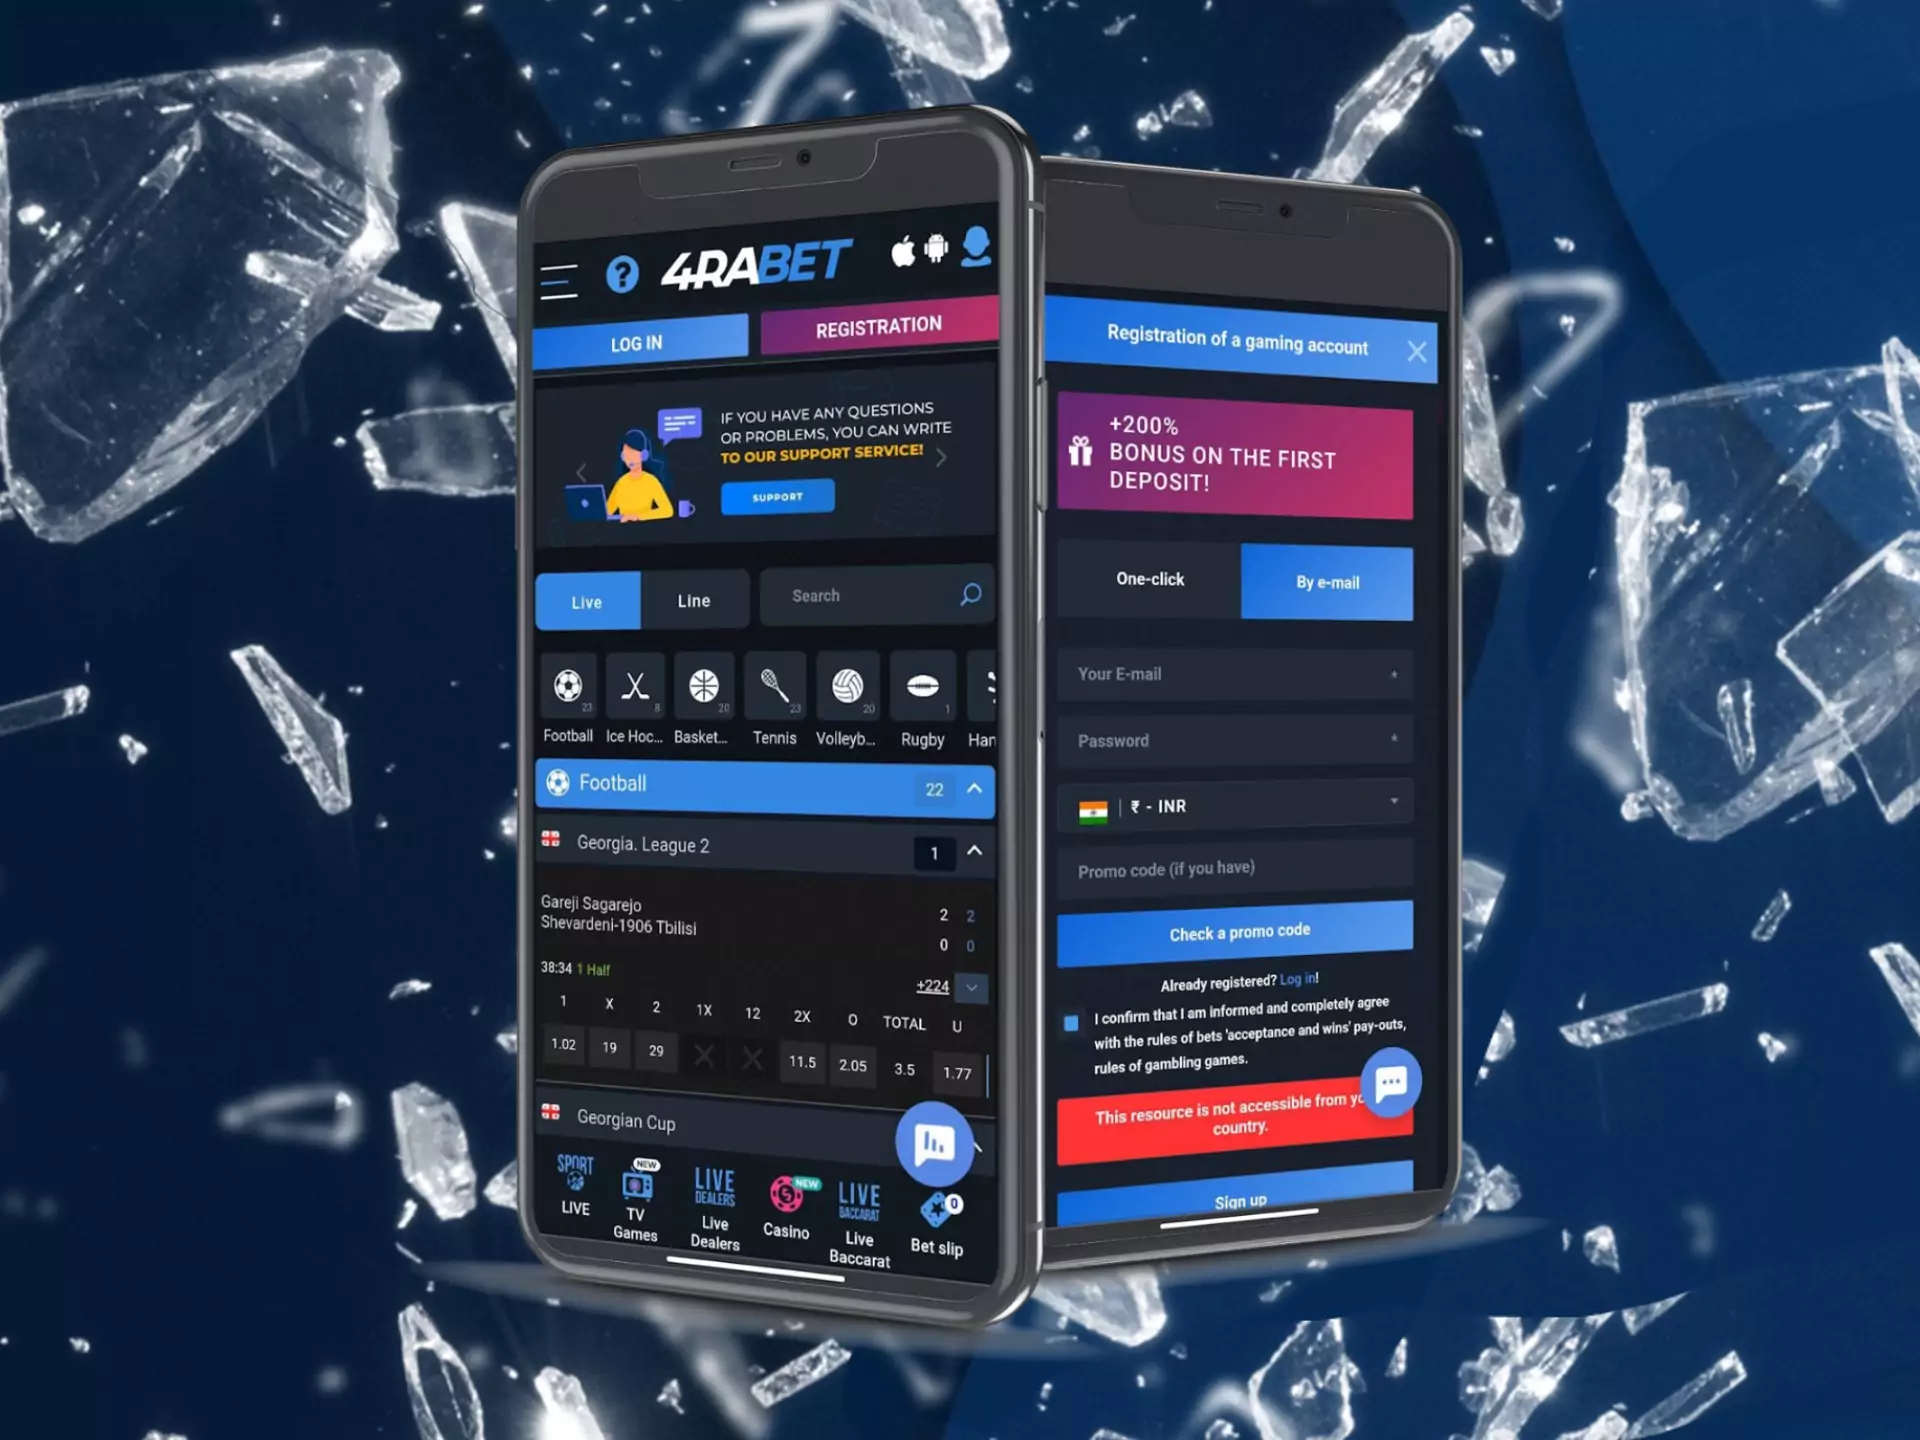 Download the 4rabet app on your phone and place bets whenever you want.